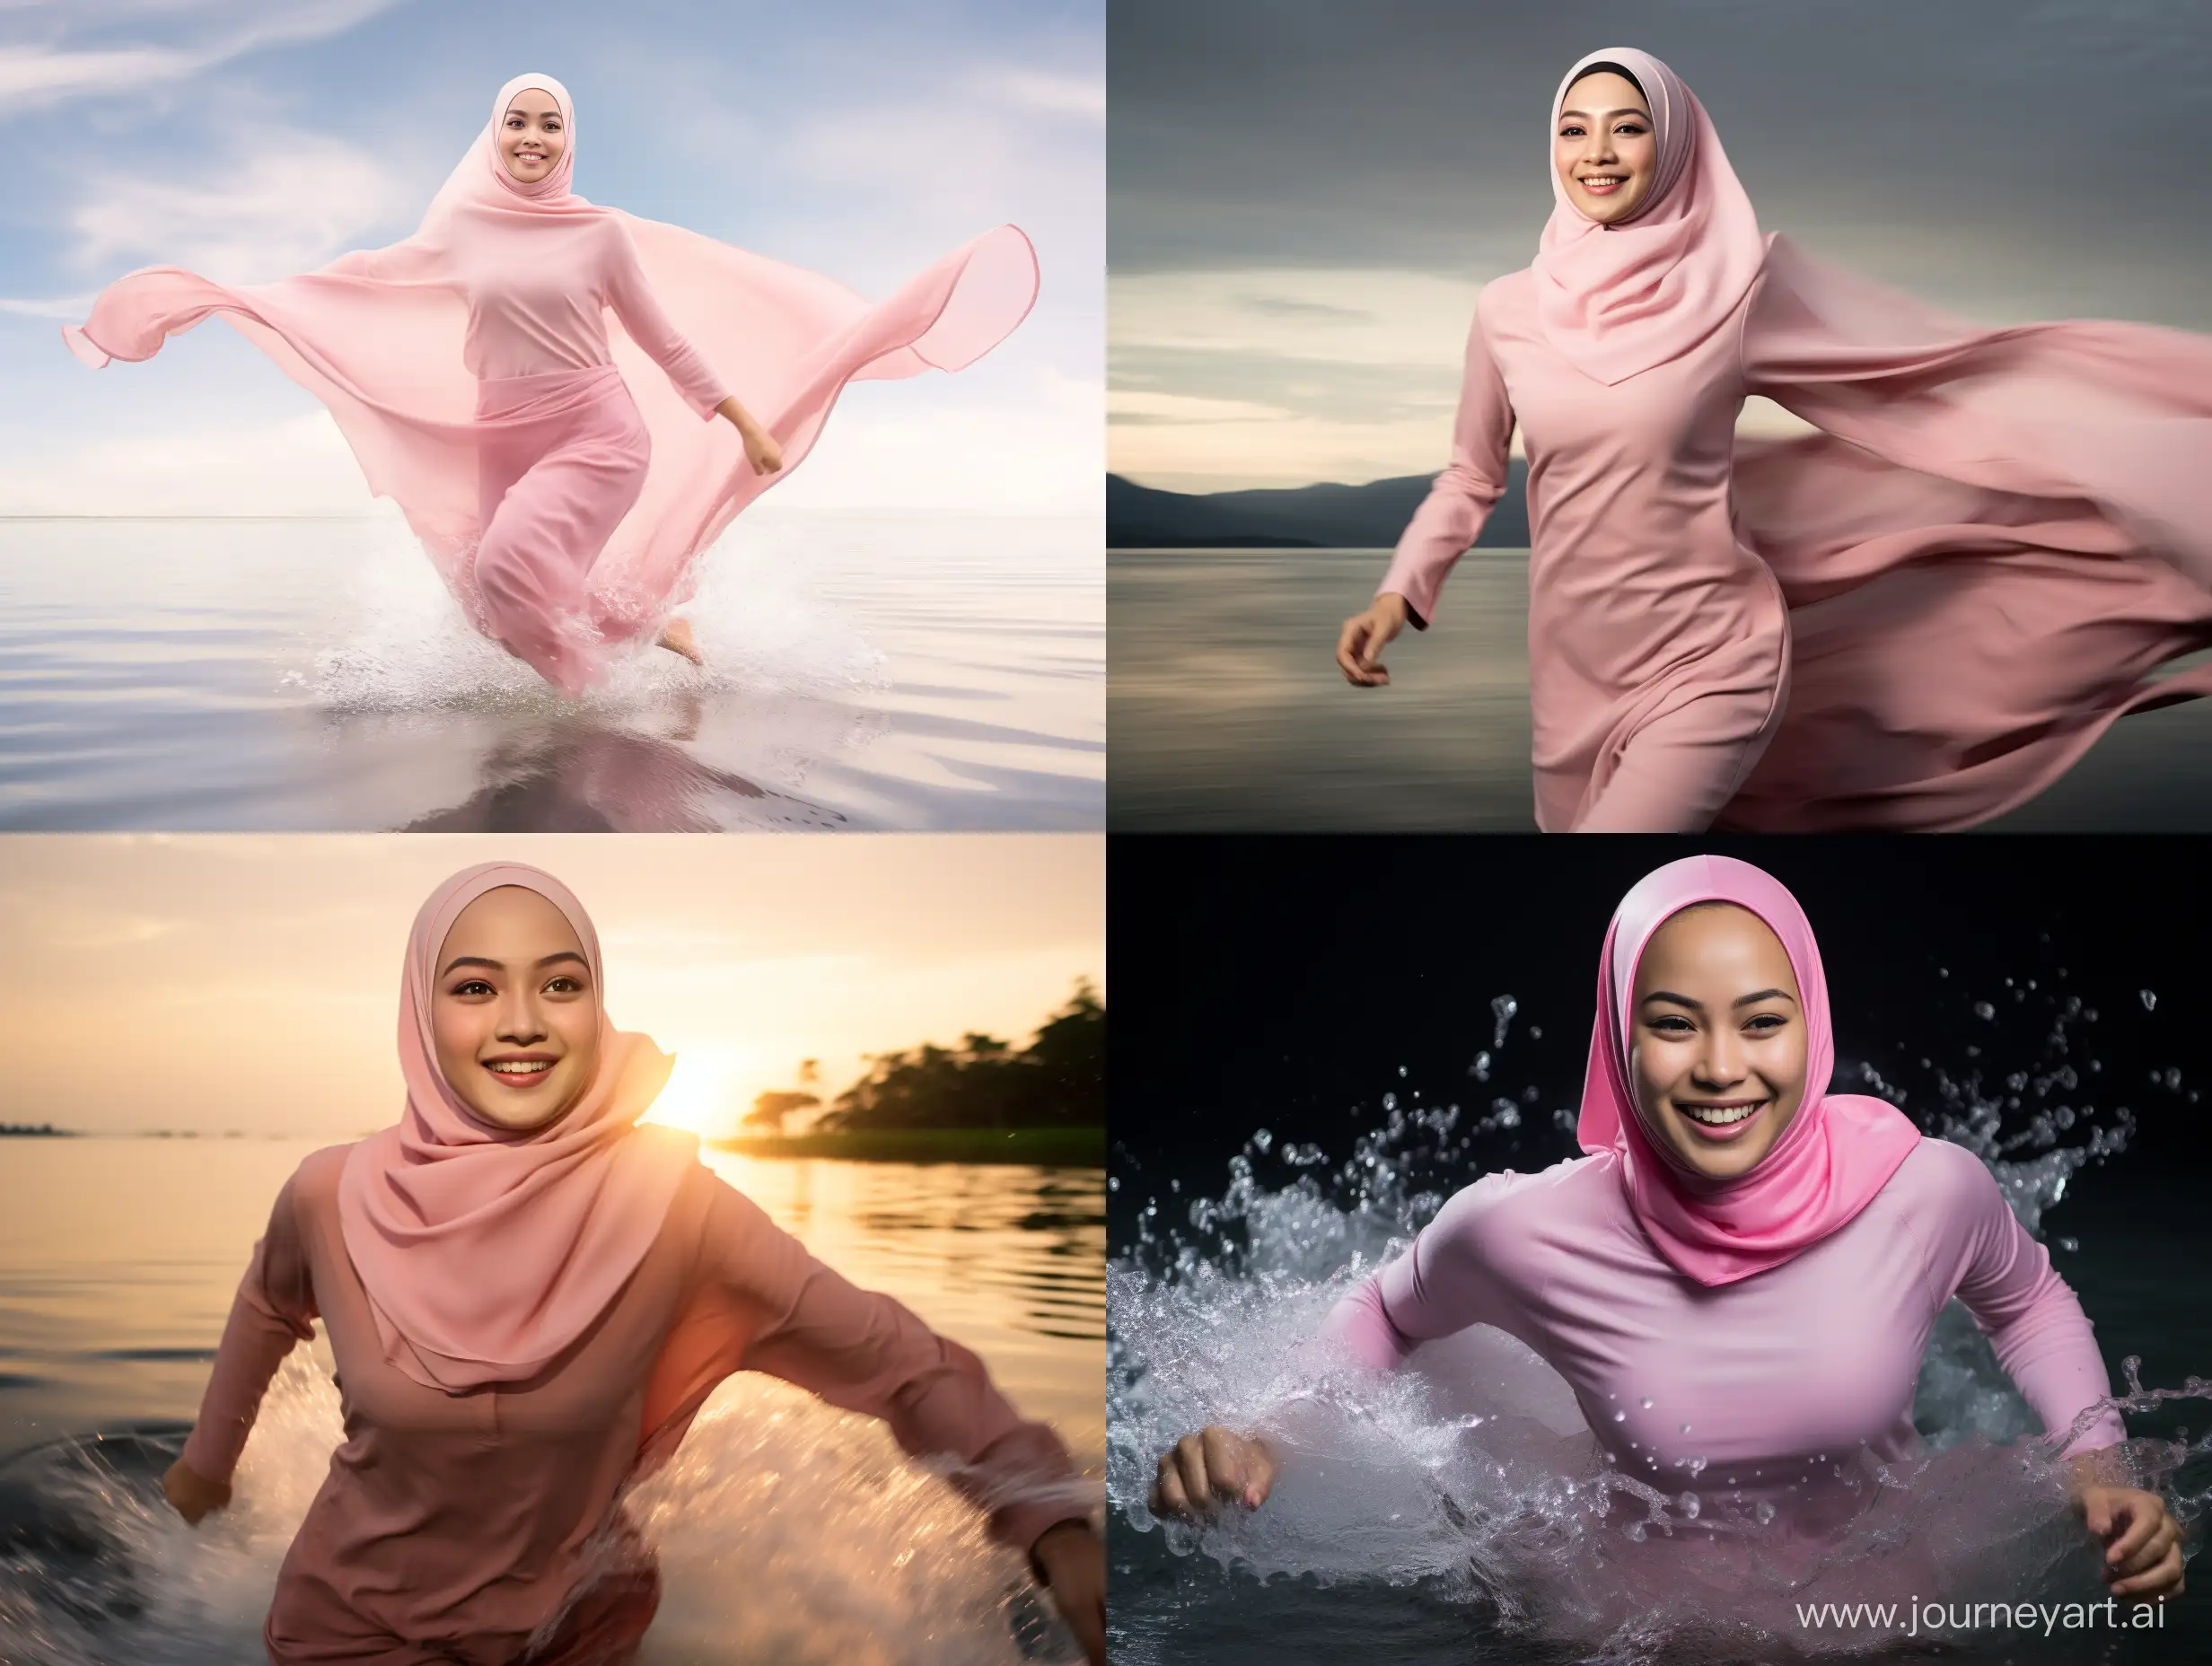 A full view of a young, beautiful, Indonesian Muslim woman, 23 years old, running with the speed of light over the water in a high-speed moment. She runs like the FLASH, her body emitting lightning and thunder. She smiles cheekily, looking good, her eyes fixed on the front. She has a perfect body, white skin, wearing a pink, futuristic suit up with LED lights and armor. She is in a modern city and lake setting, carrying a bag of plastic-packaged rice. The image is hyperrealistic, with a greenery morning background, perfect anatomy, 4K resolution, and dramatic lighting.